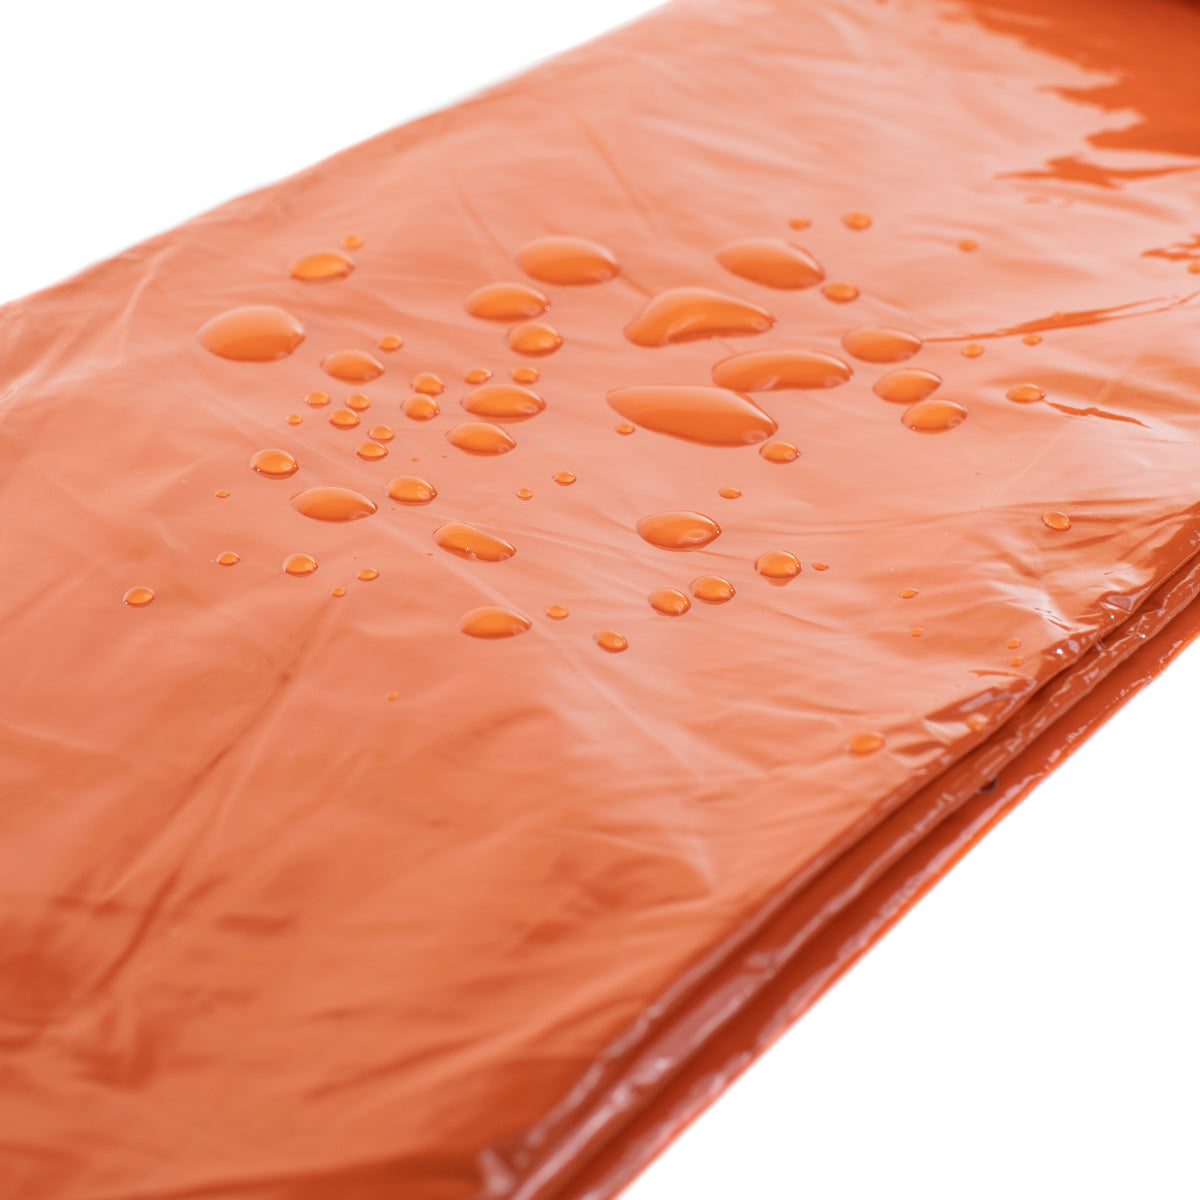 flat orange bivy with water drops